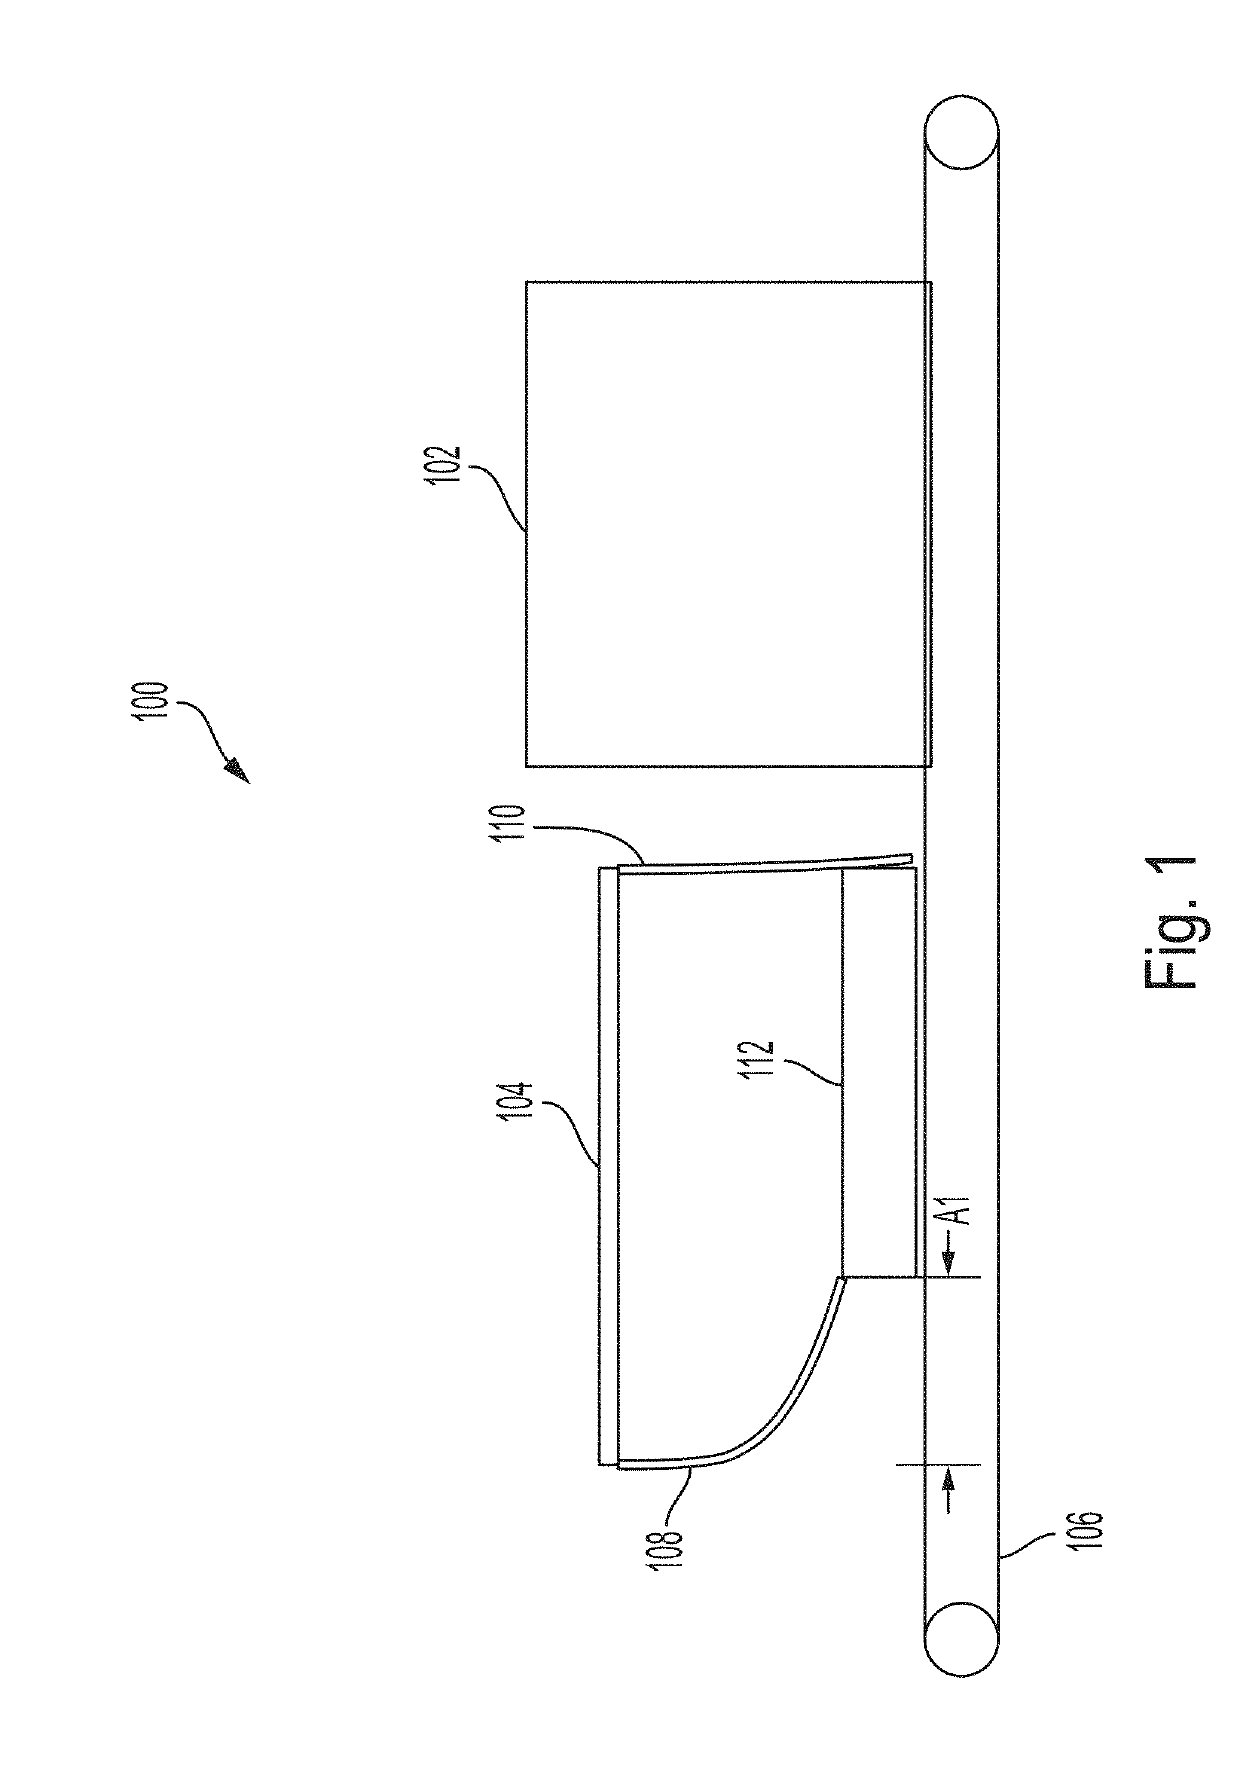 Method and apparatus to reduce radiation emissions on a parcel scanning system